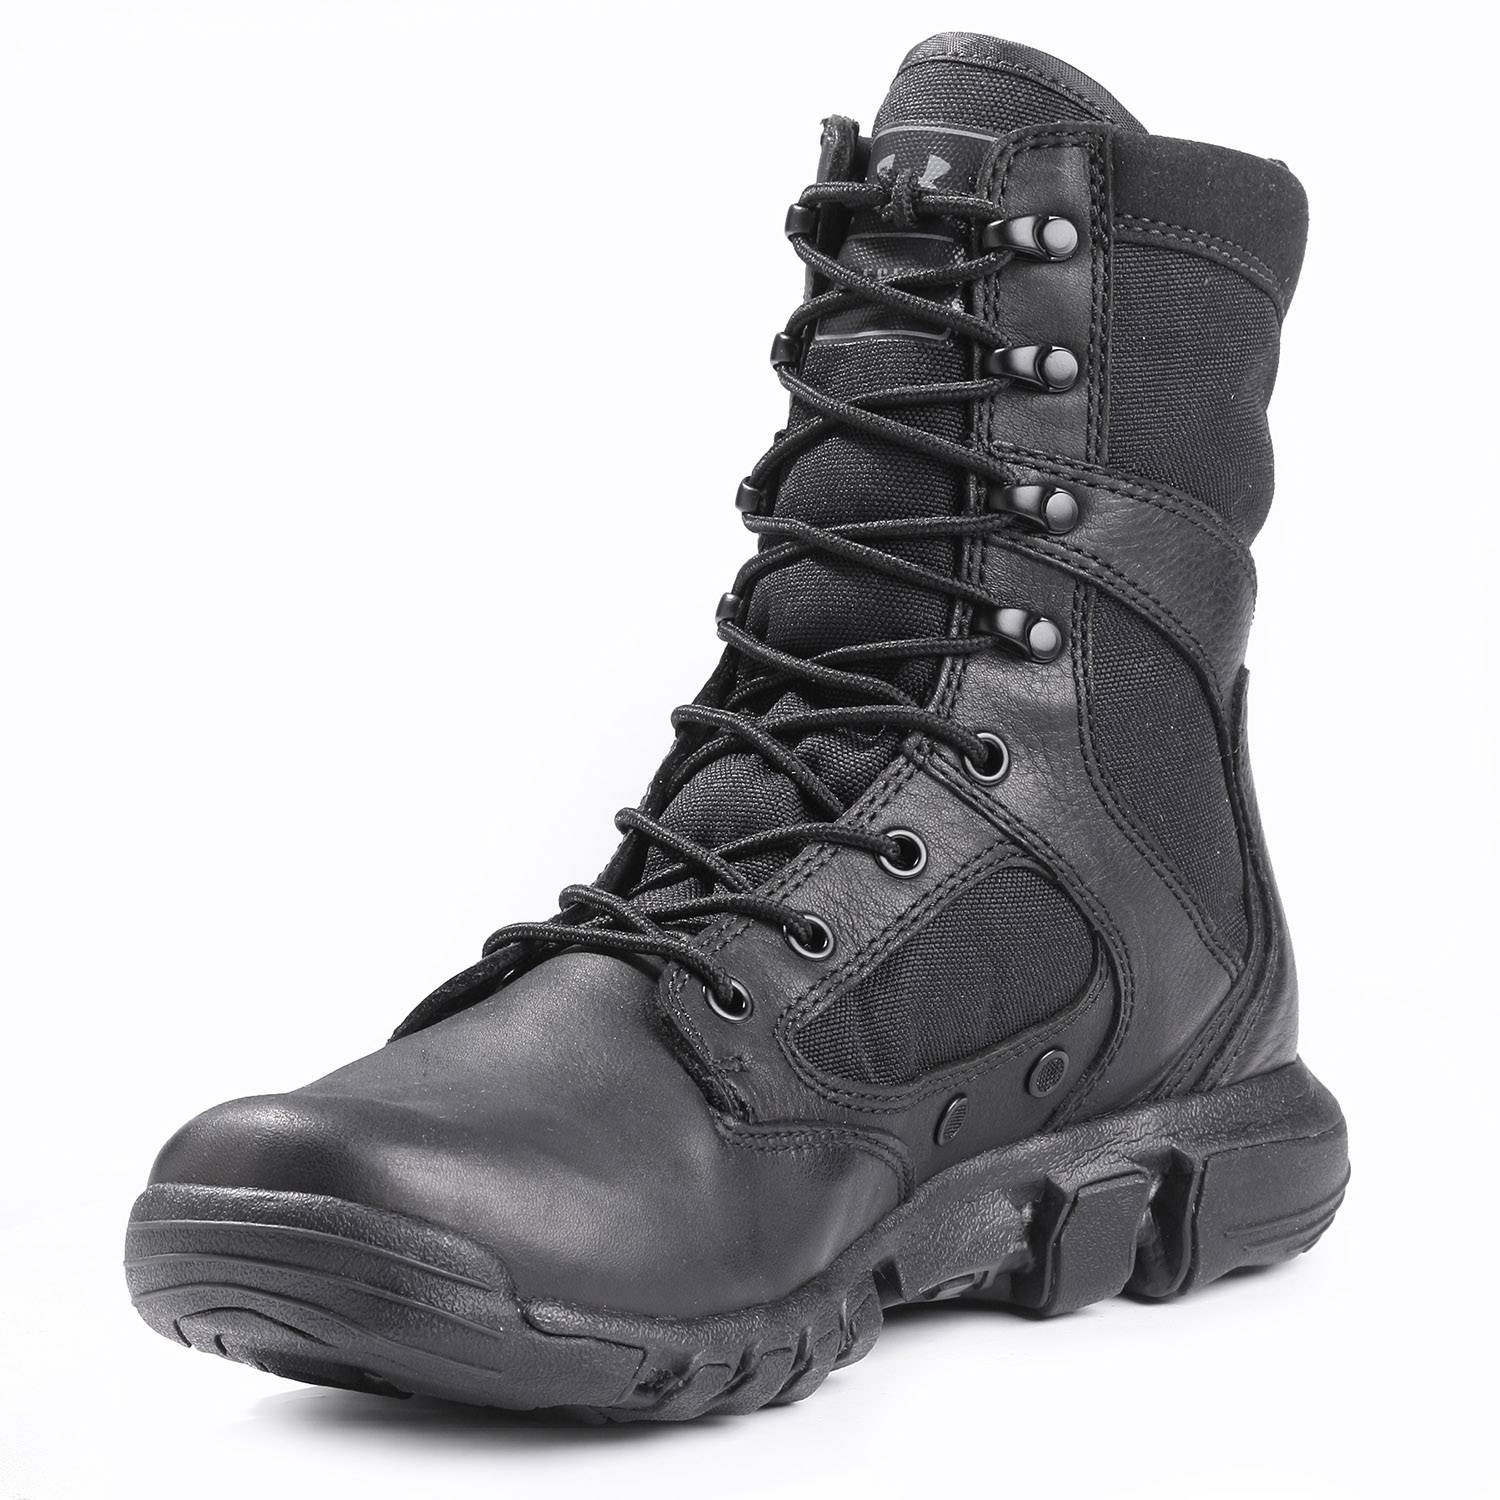 Under Armour Alegent Duty Boots at Galls